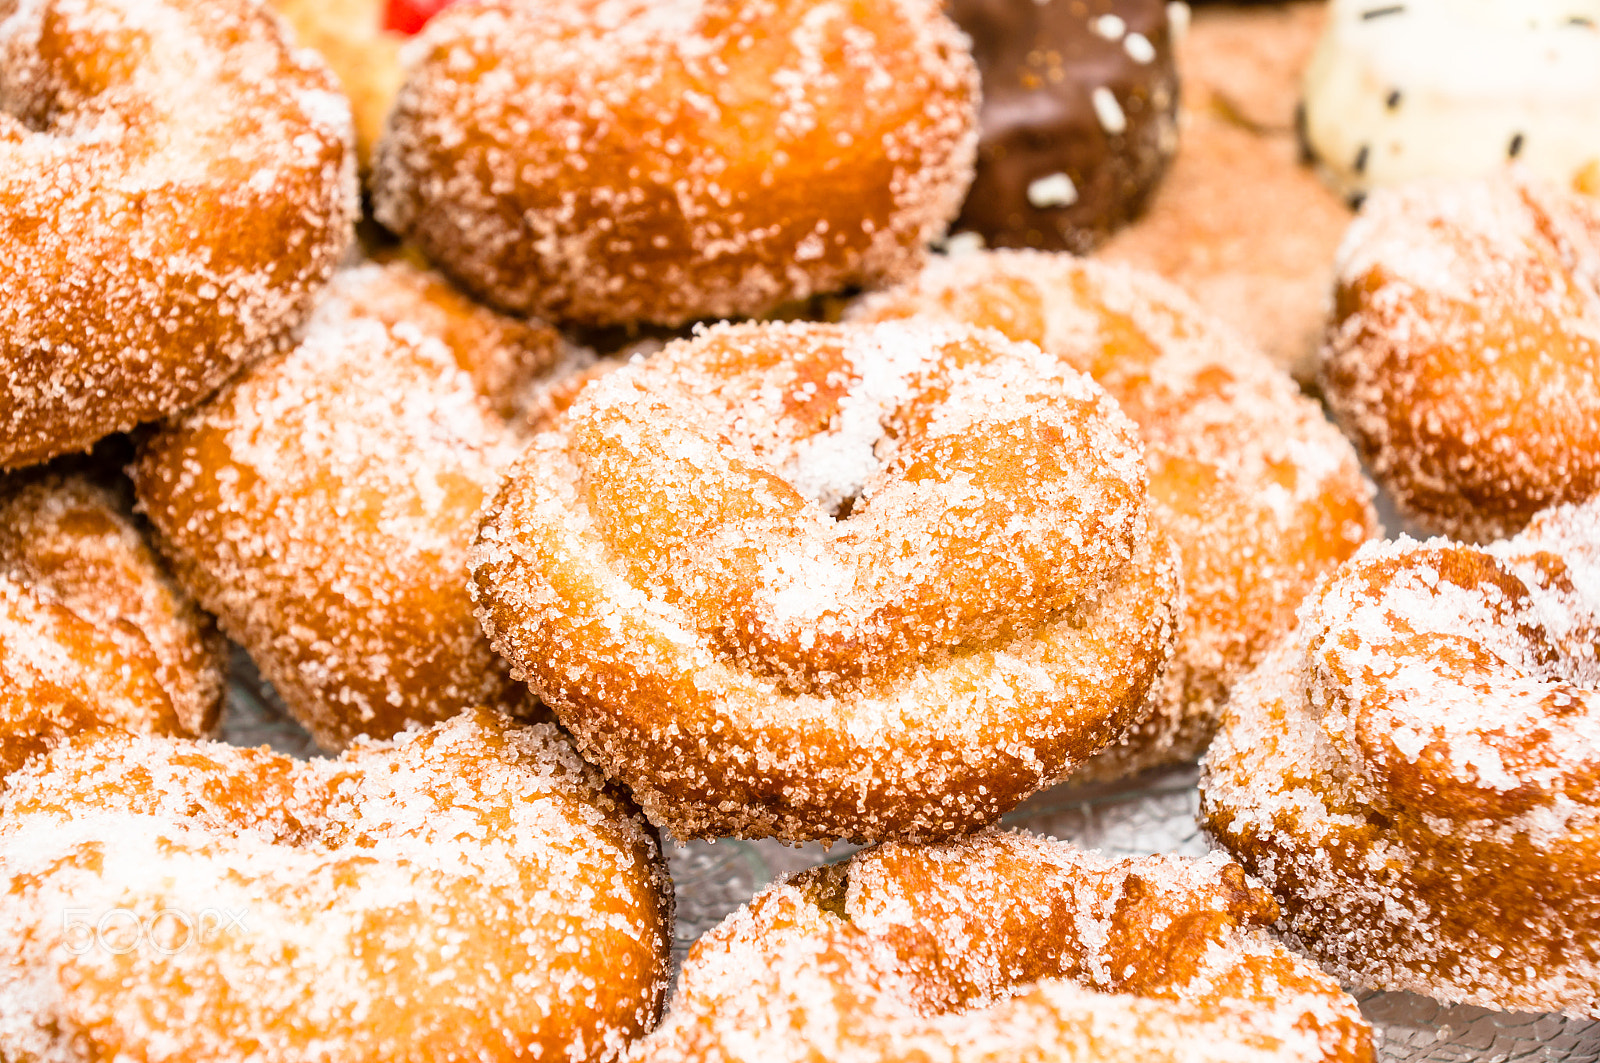 Sony SLT-A57 sample photo. Closeup of rosquillas, typical spanish donuts photography